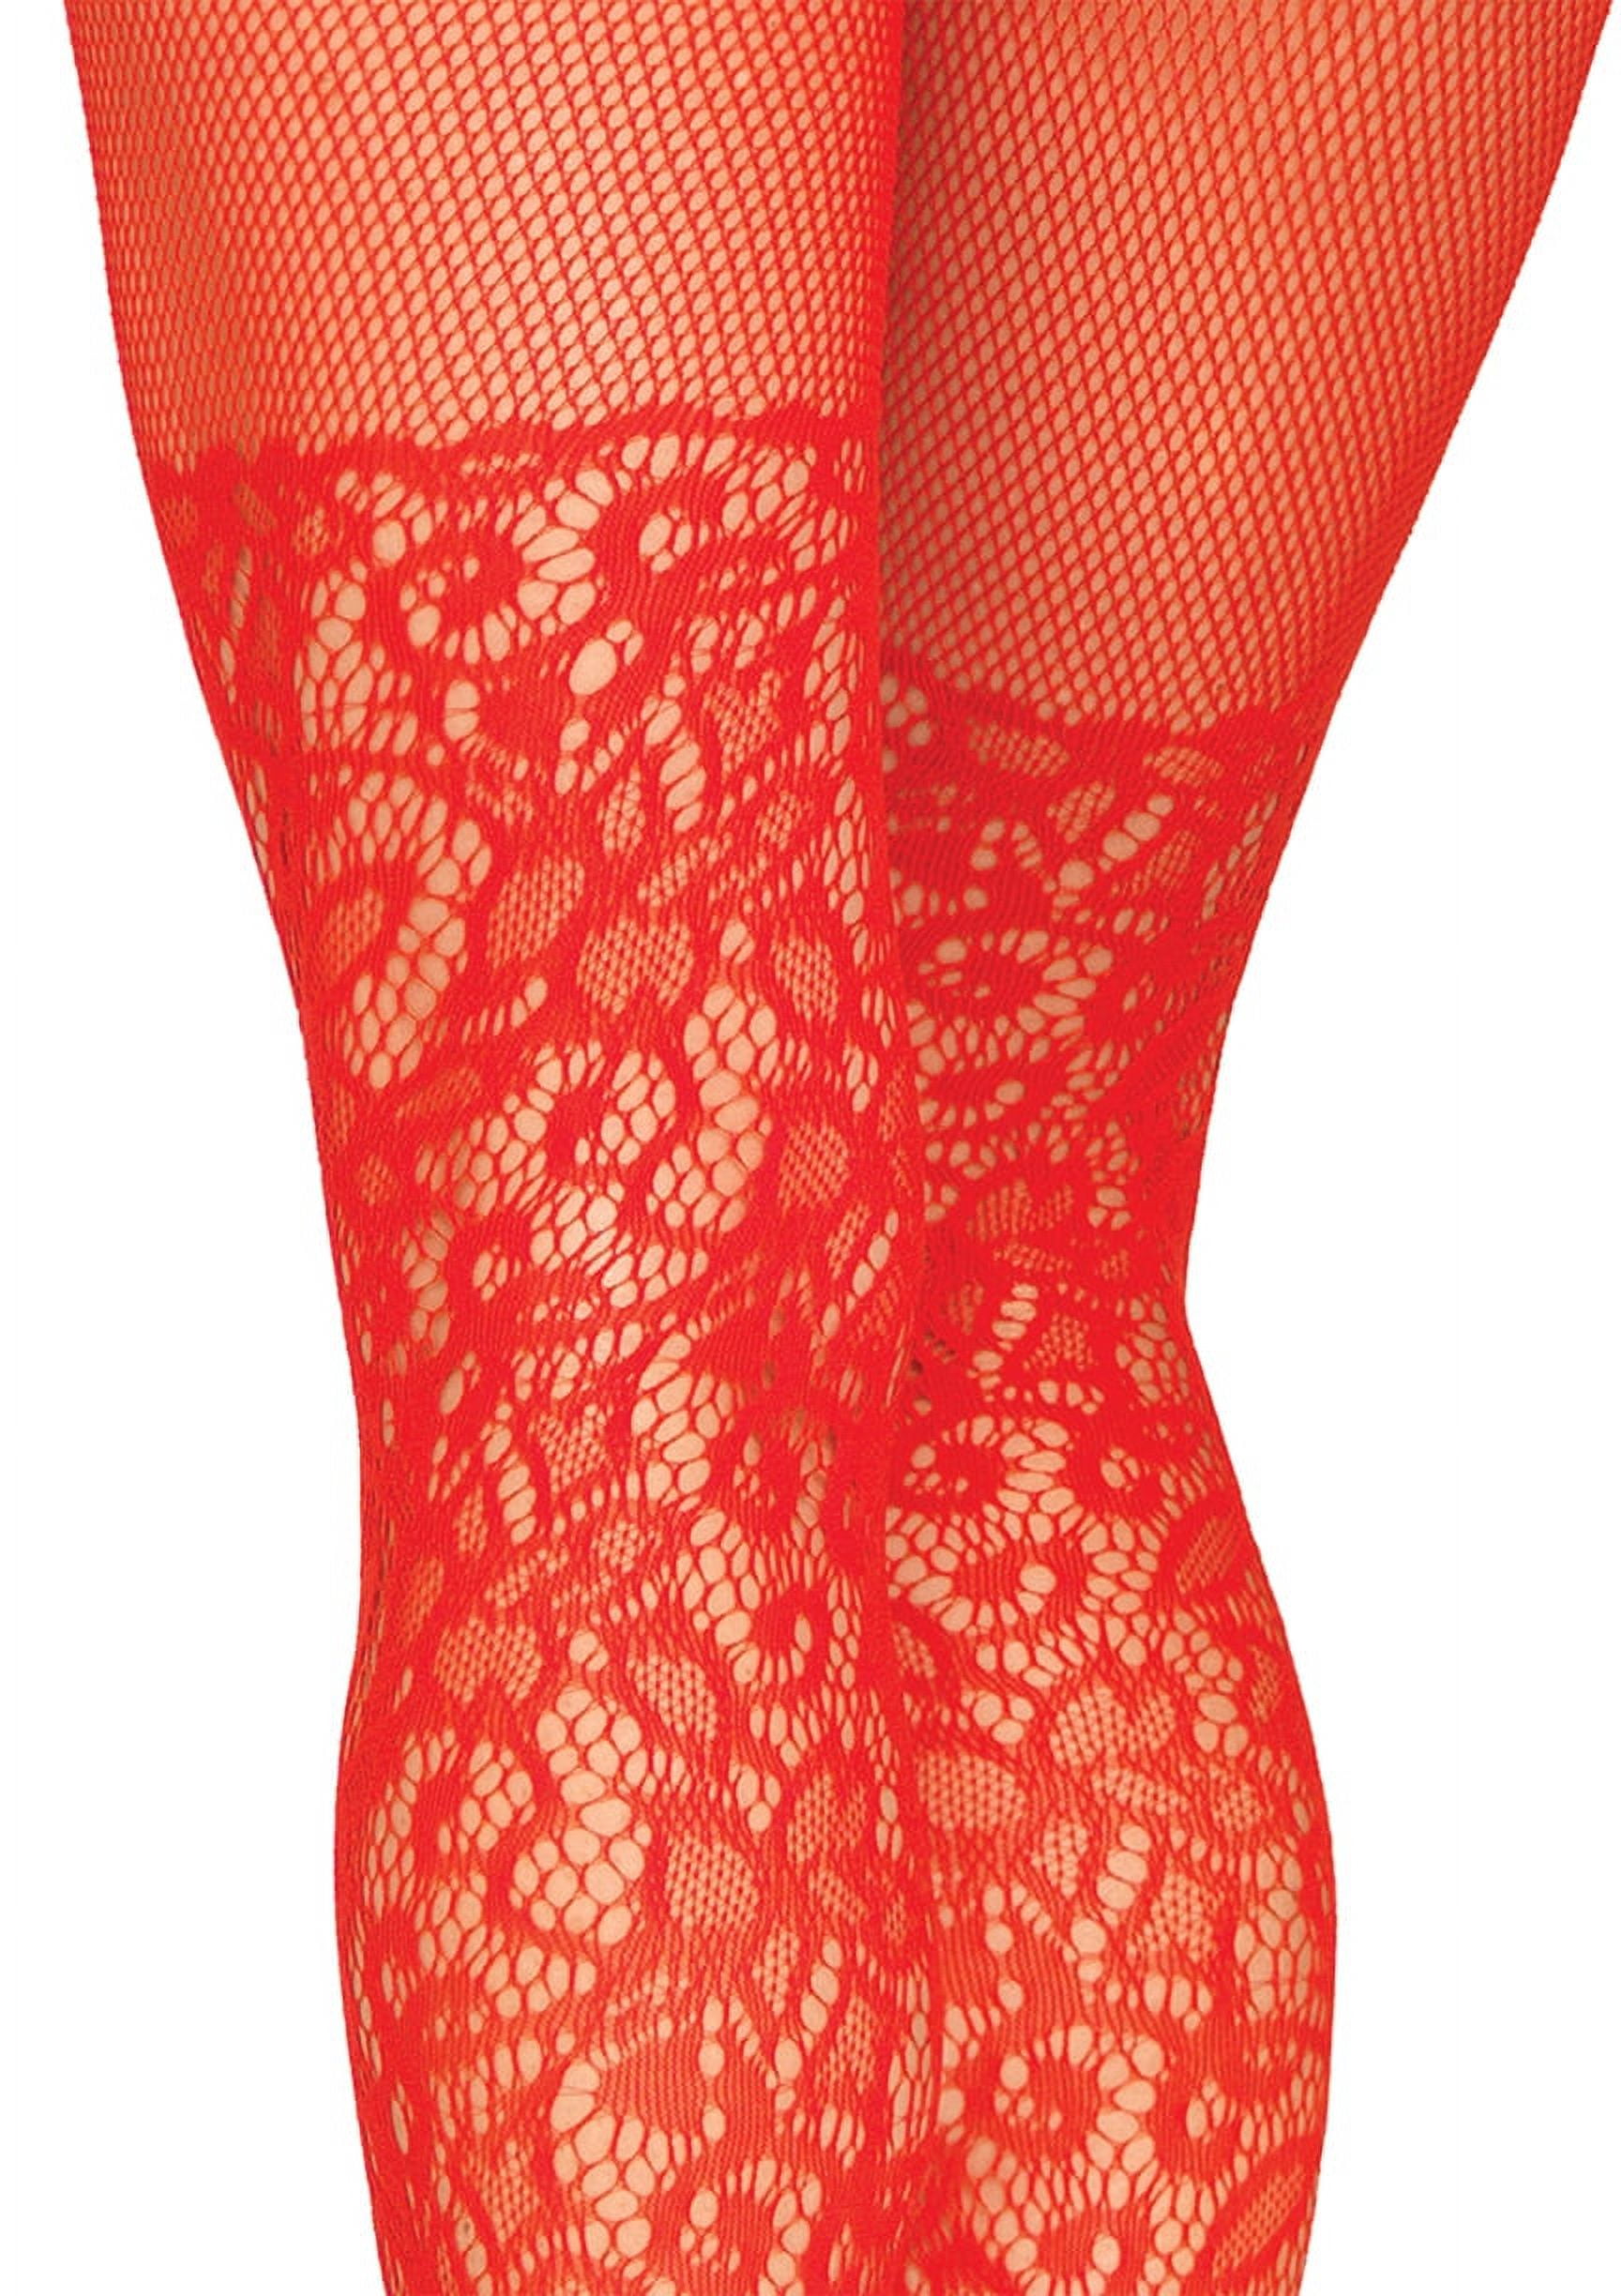 Alan S. Sexy fishnet body with lace: for sale at 9.99€ on